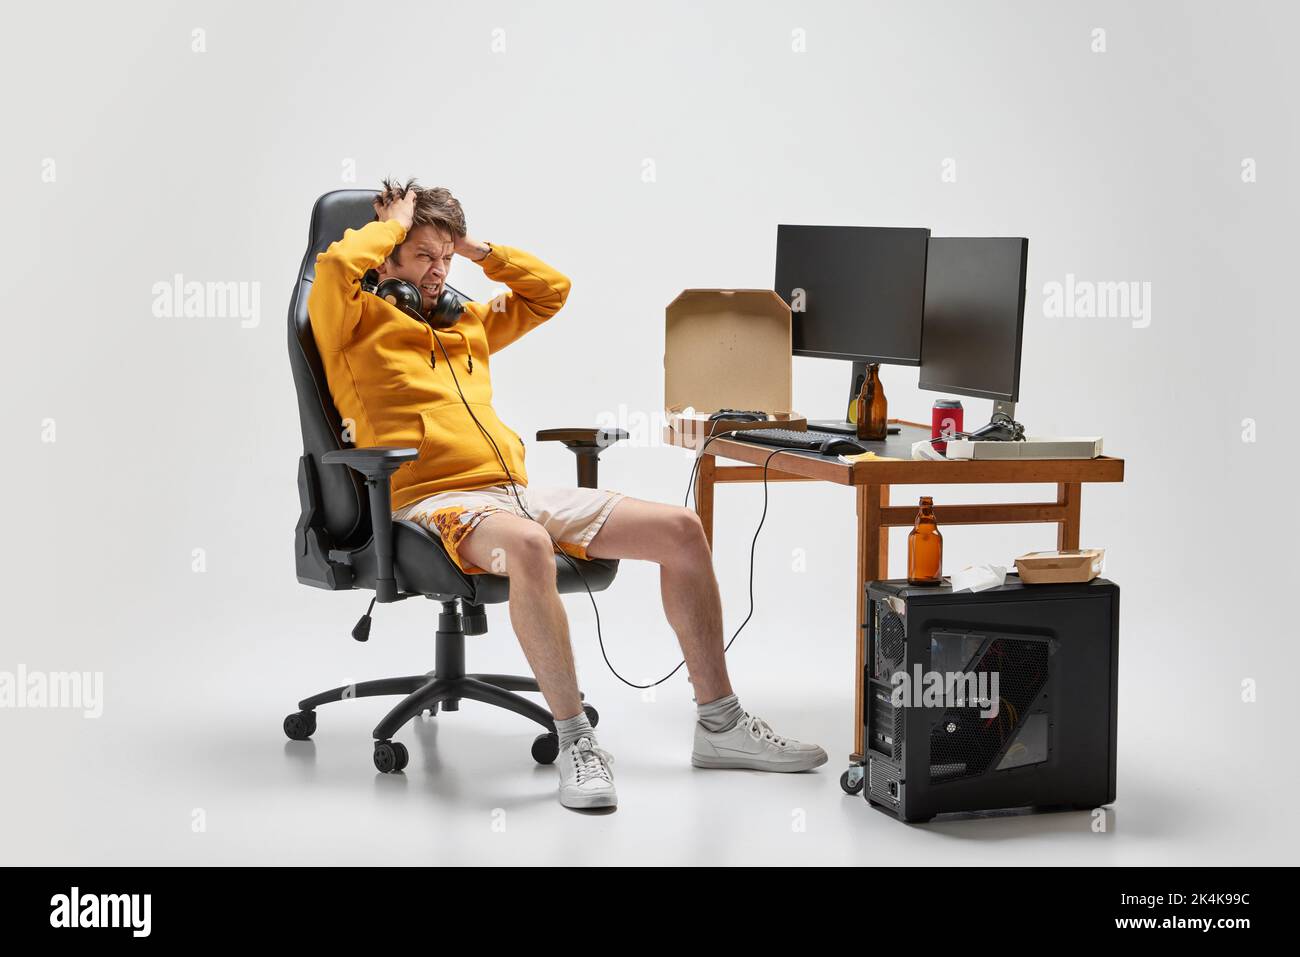 Emotional man, student sitting at home, playing computer games isolated over grey background. Hobby, studying, education, youth, remote workplace Stock Photo